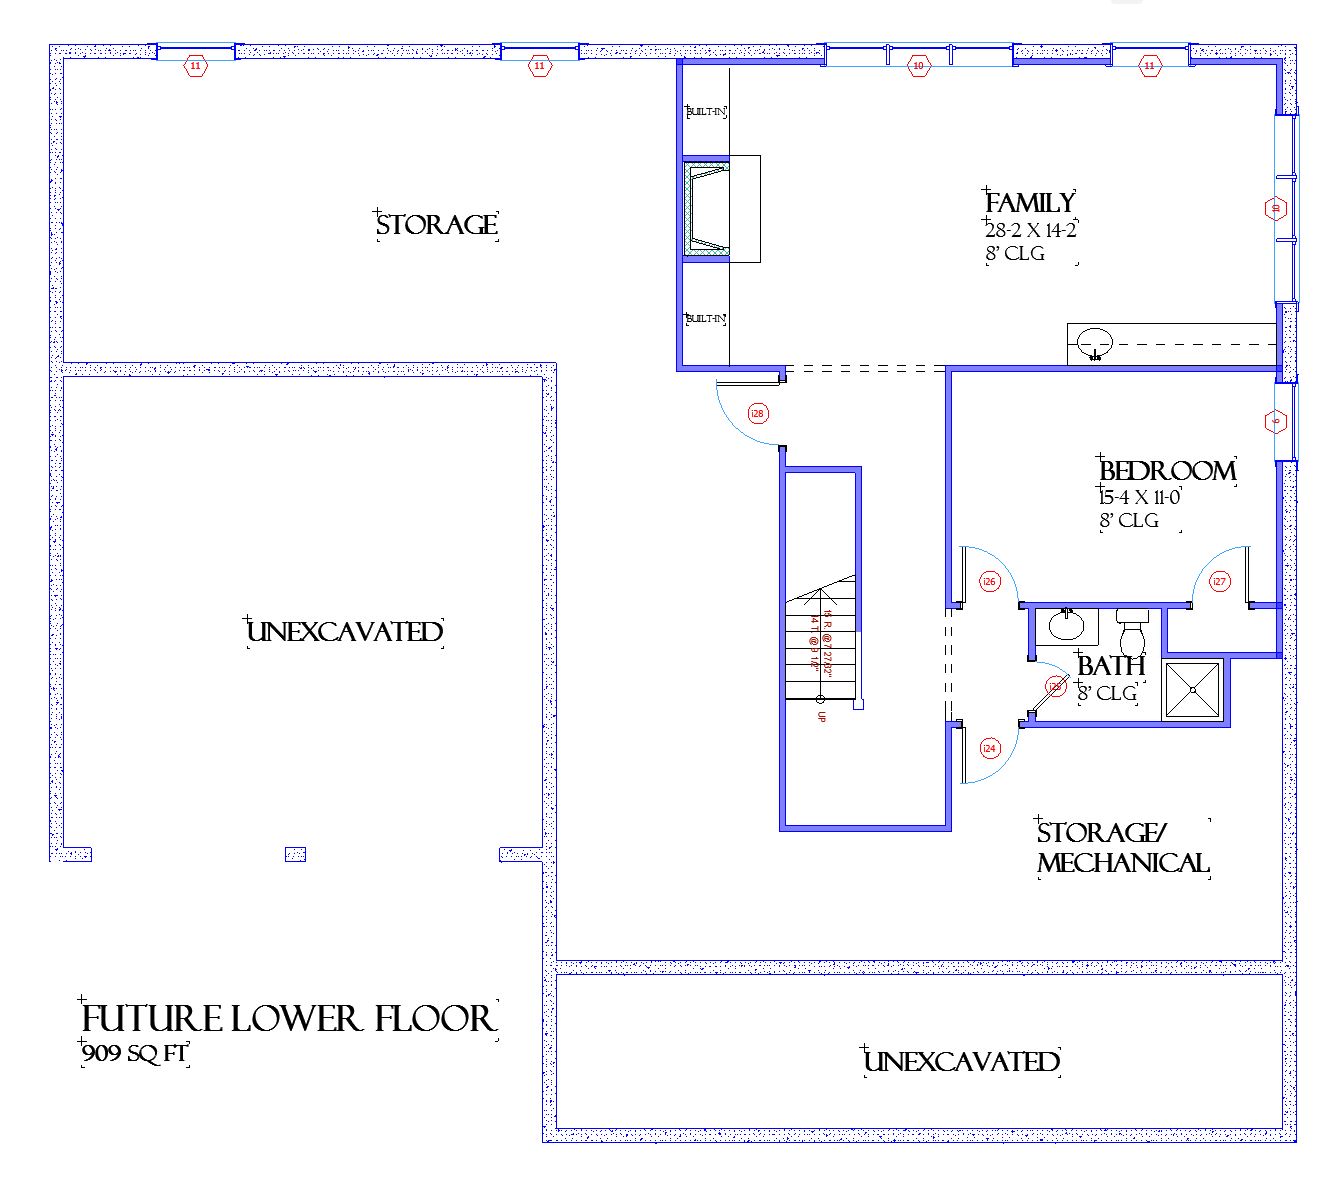 Gladstone - Home Design and Floor Plan - SketchPad House Plans